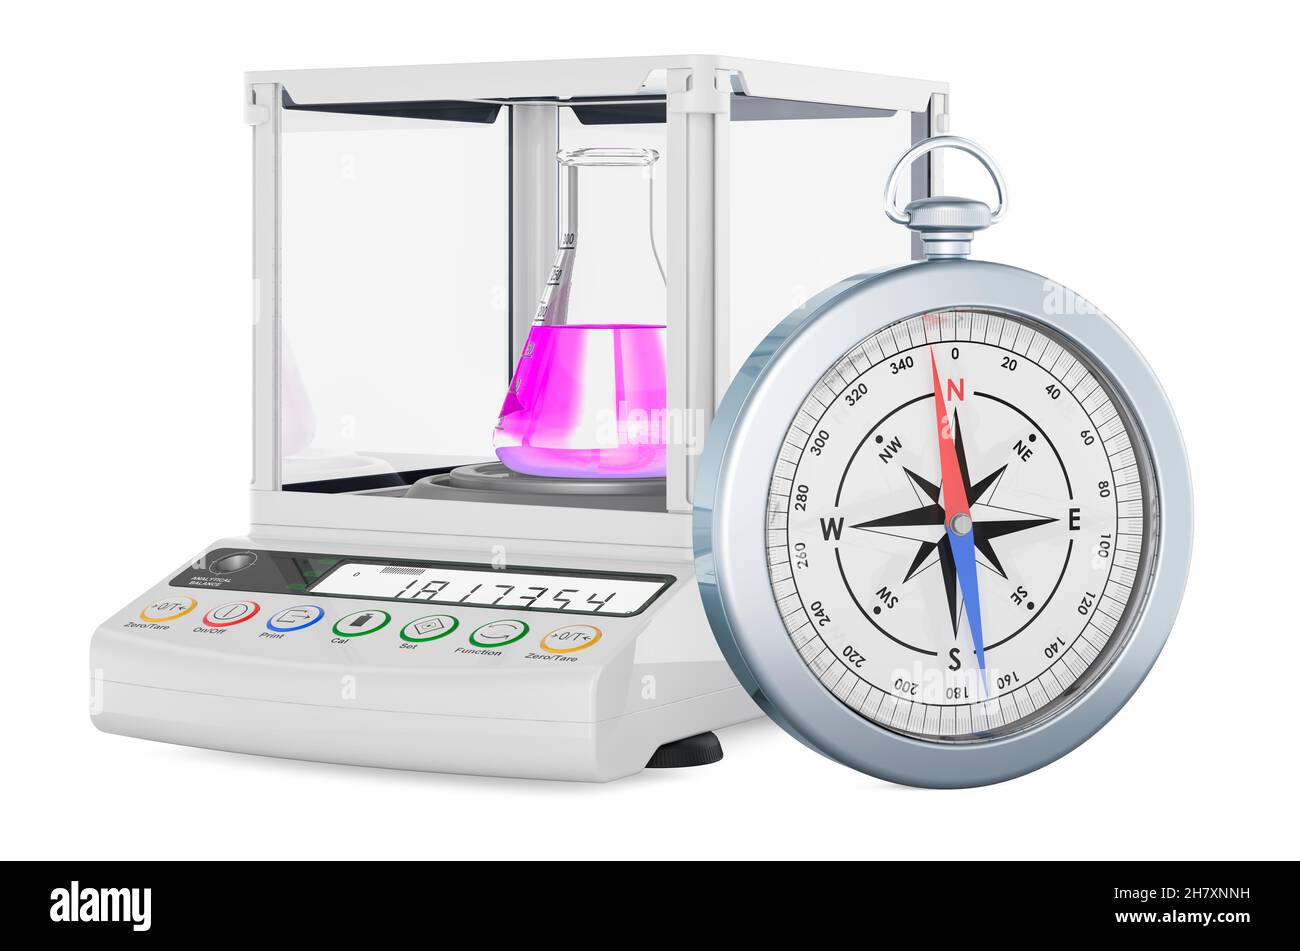 Analytical balance, digital lab scale with compass, 3D rendering isolated on white background Stock Photo